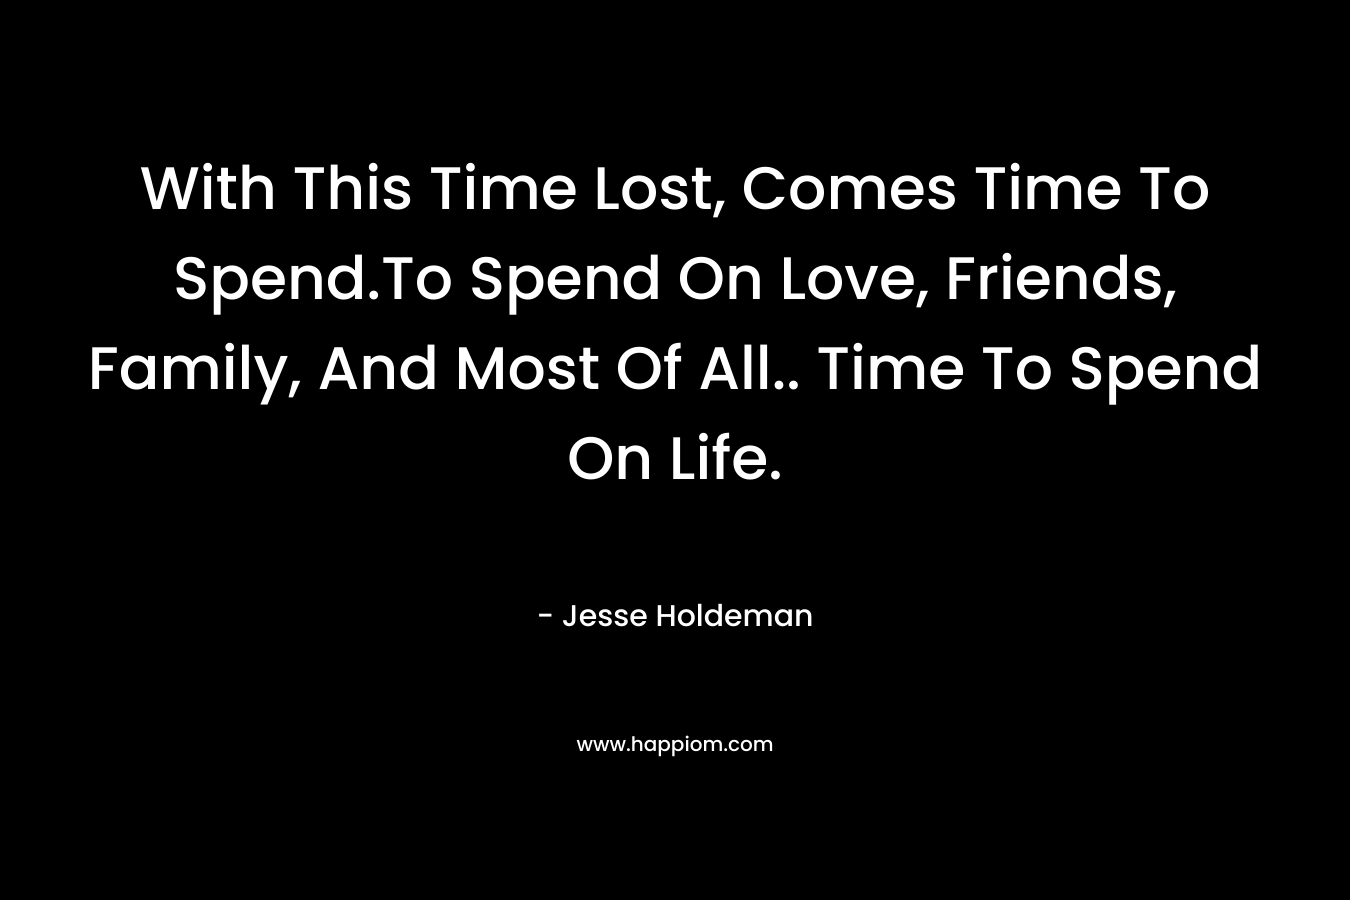 With This Time Lost, Comes Time To Spend.To Spend On Love, Friends, Family, And Most Of All.. Time To Spend On Life.